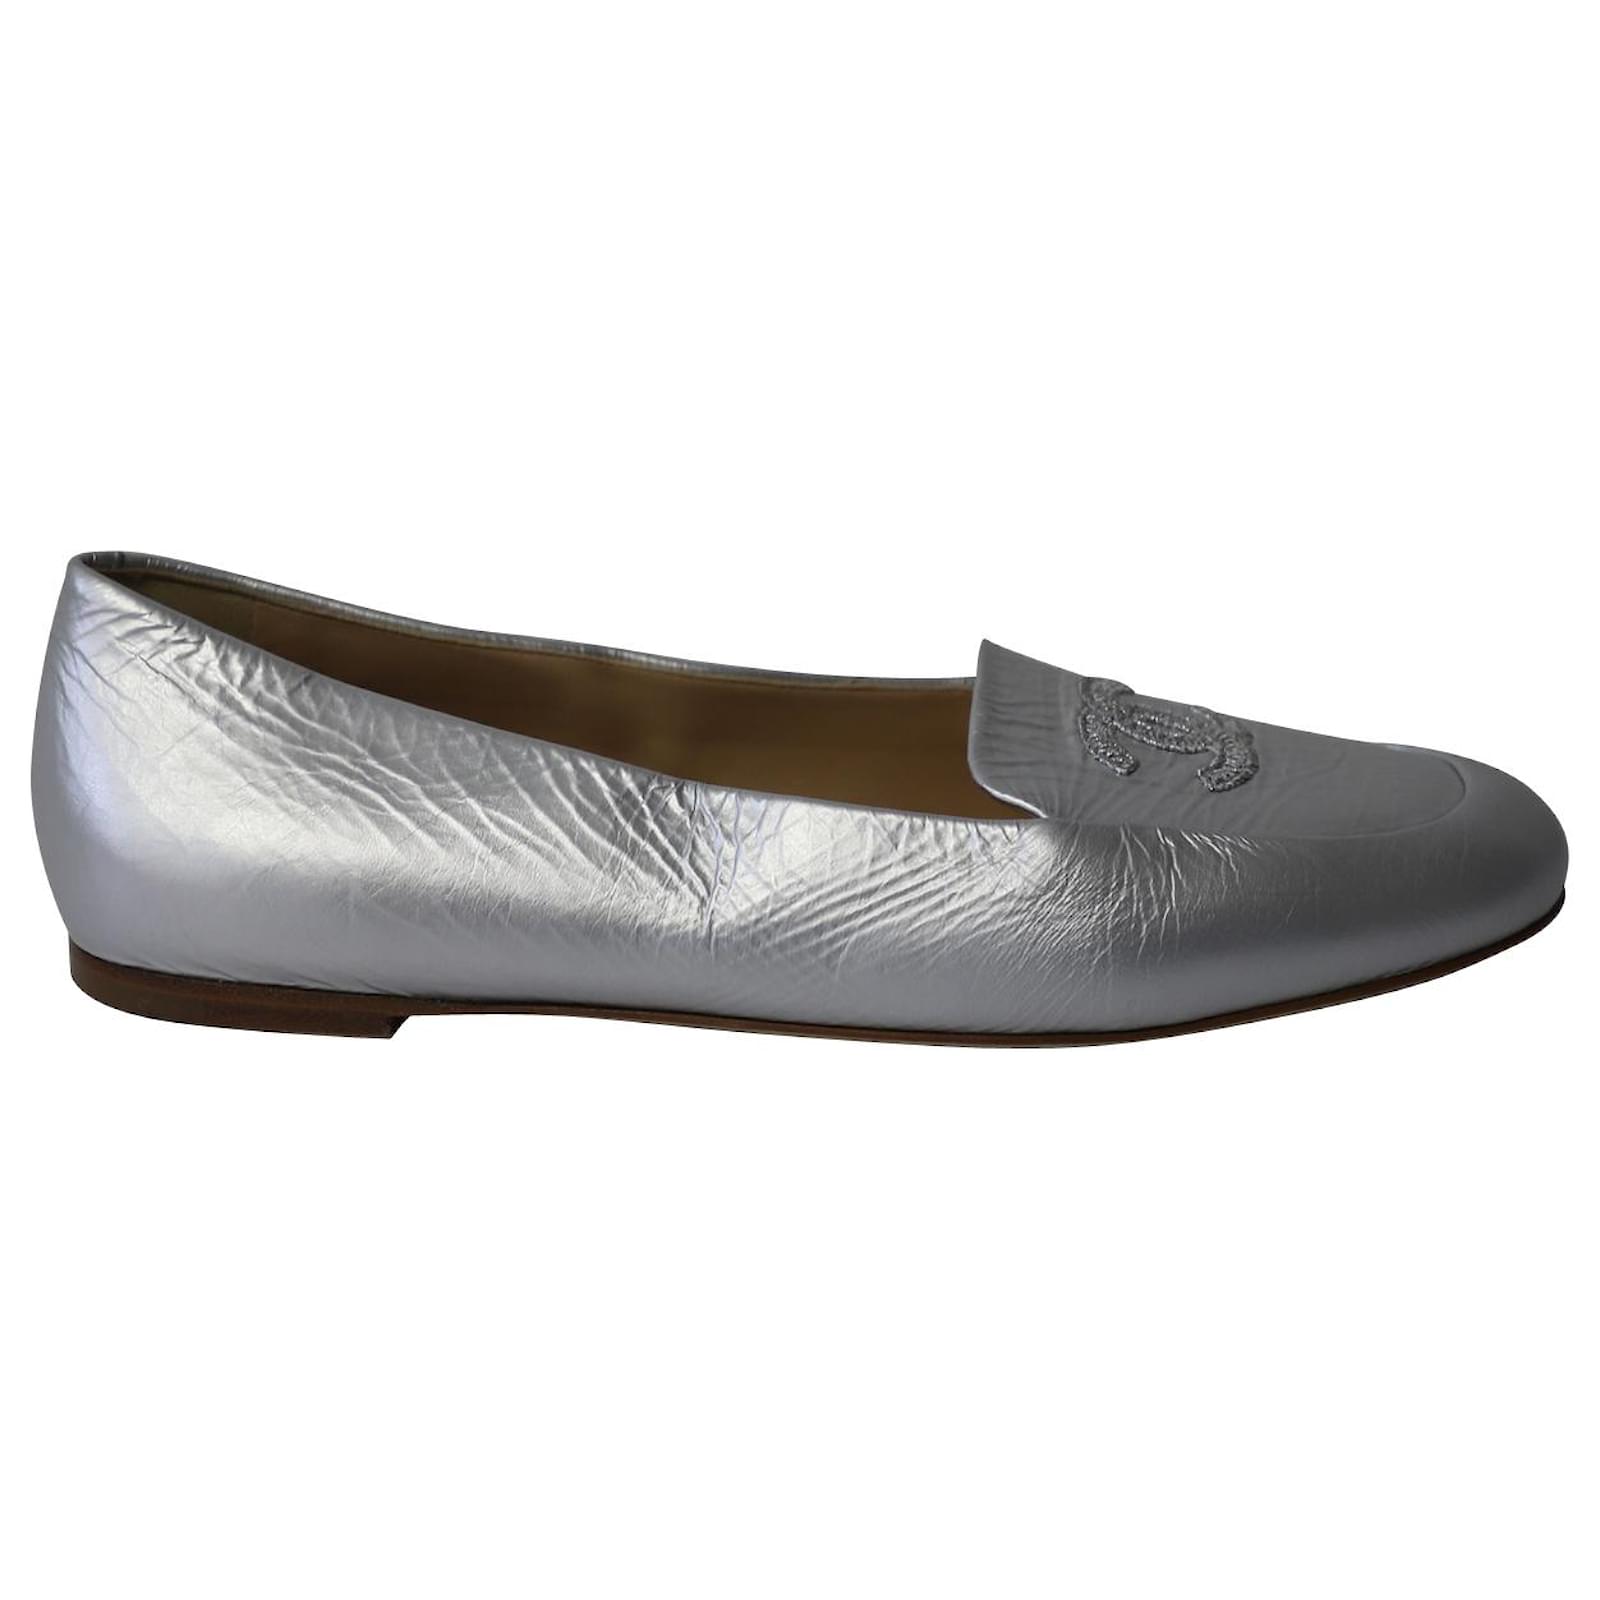 Chanel Loafers G39206 X56725 0Q187, Grey, 37